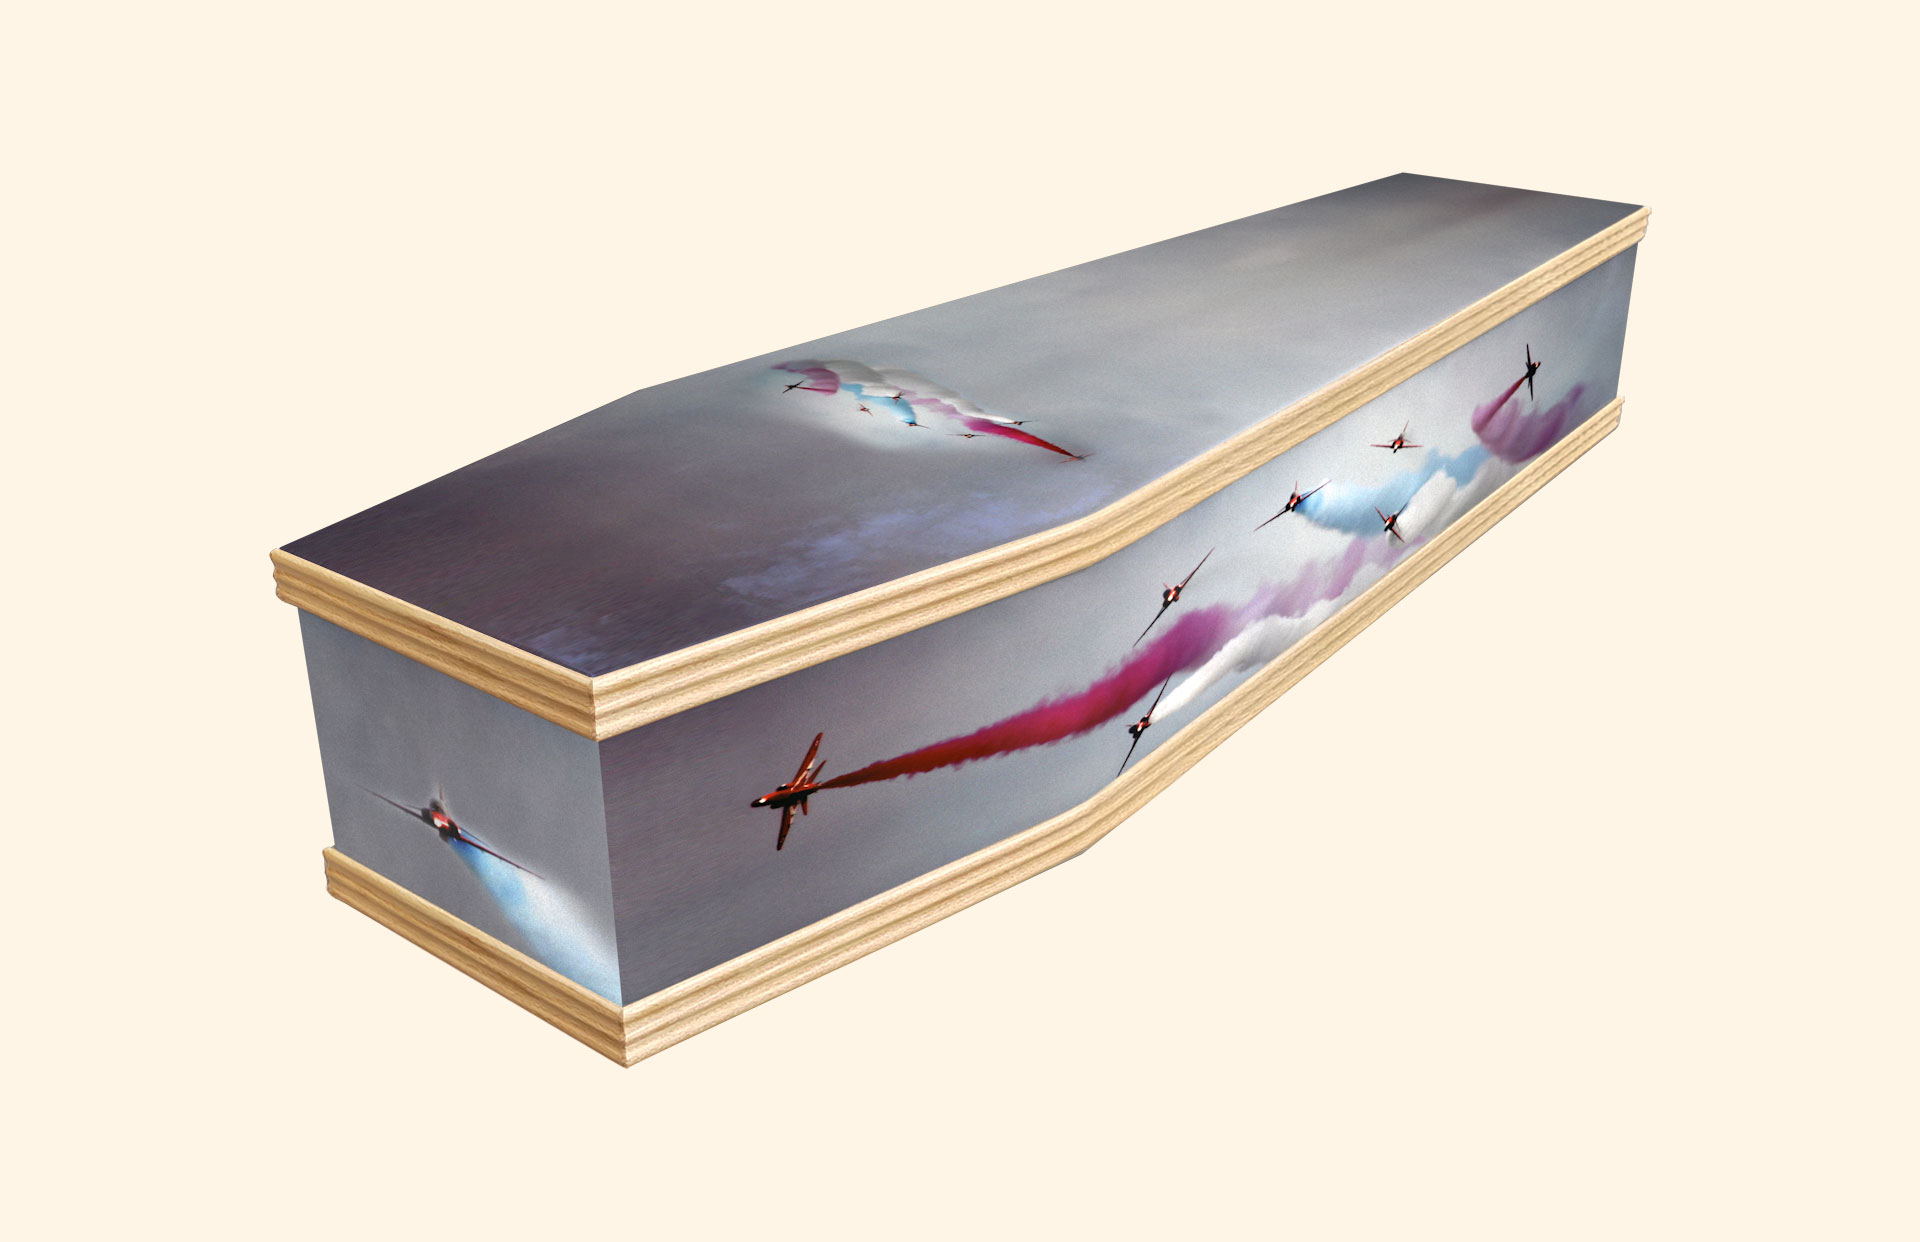 Red Arrows design on a classic coffin